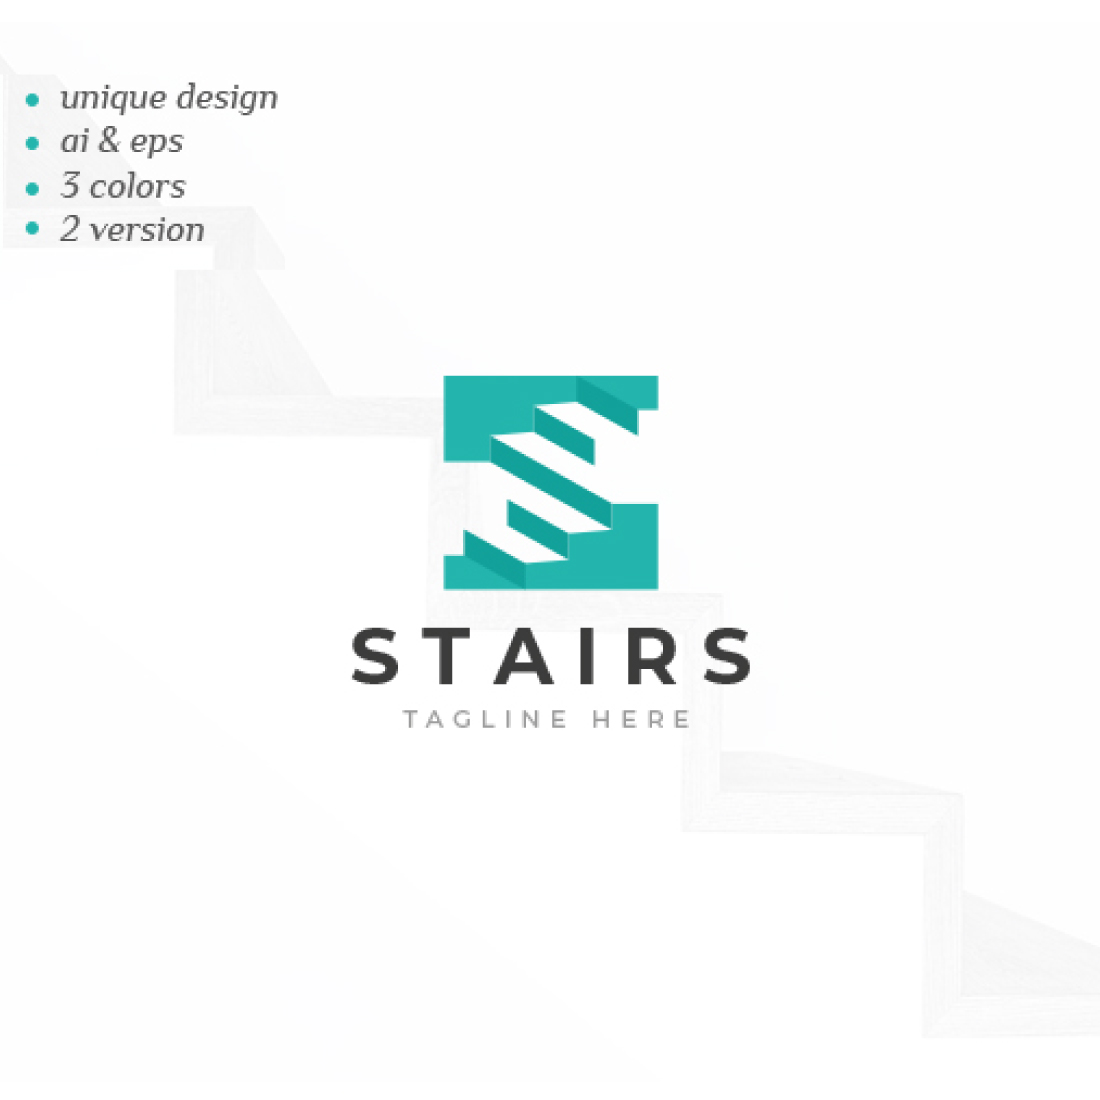 Stairs Logo cover image.